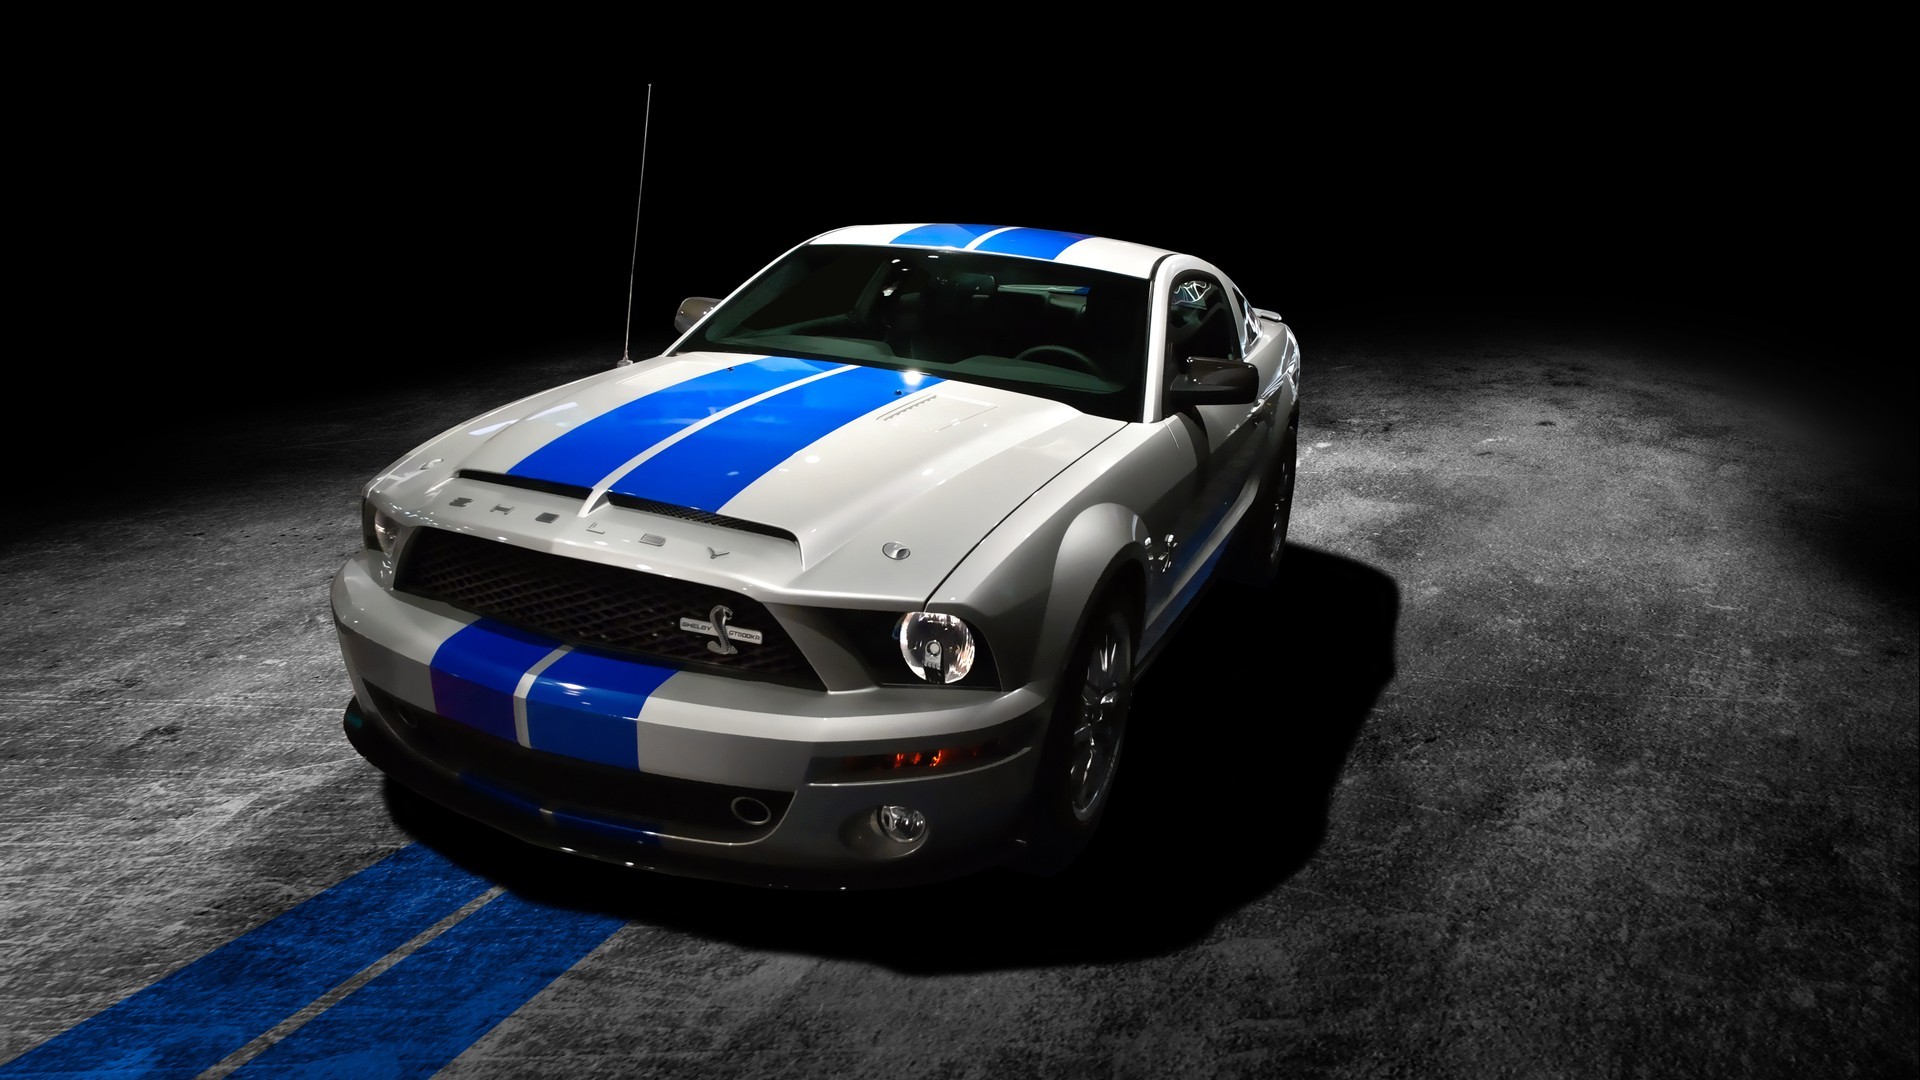 General 1920x1080 car Ford Mustang Shelby vehicle Ford silver cars blue Ford Mustang Ford Mustang S-197 muscle cars American cars racing stripes